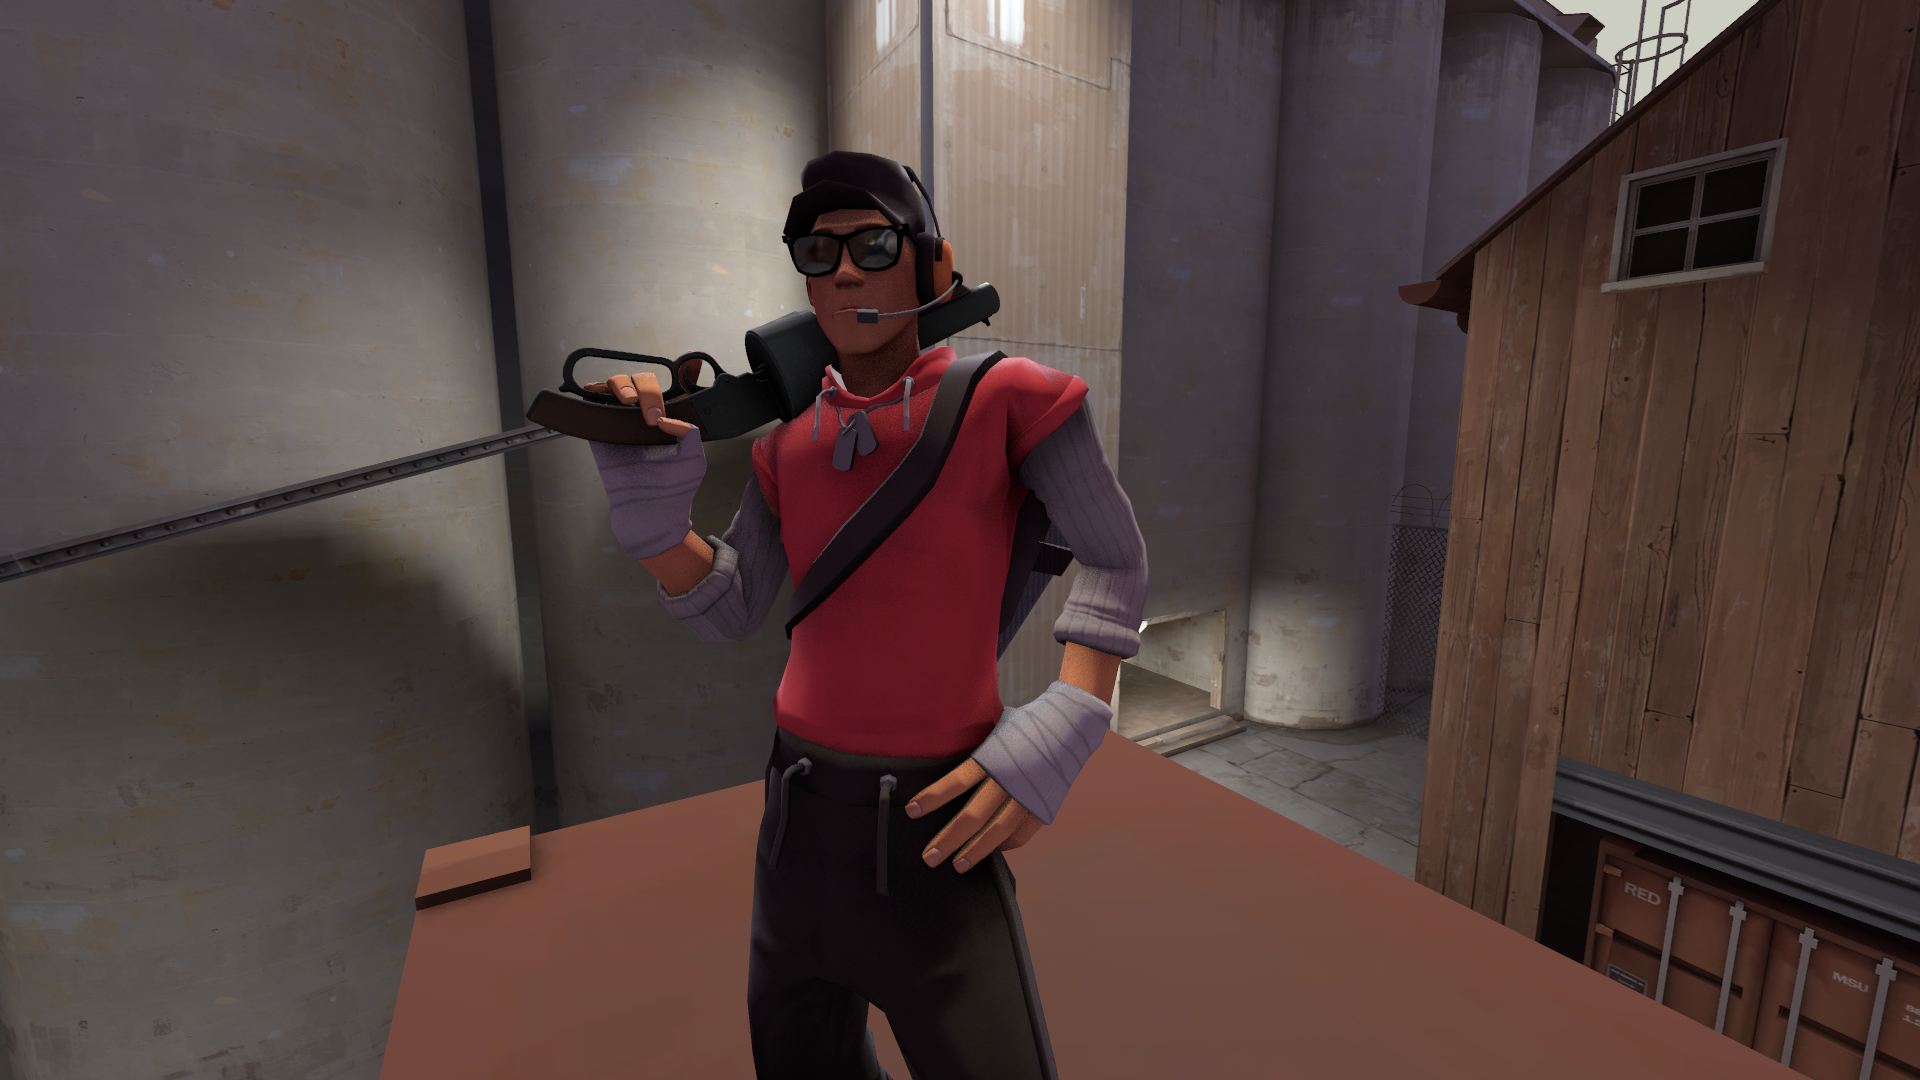 General 1920x1080 Scout (TF2) Team Fortress 2 PC gaming